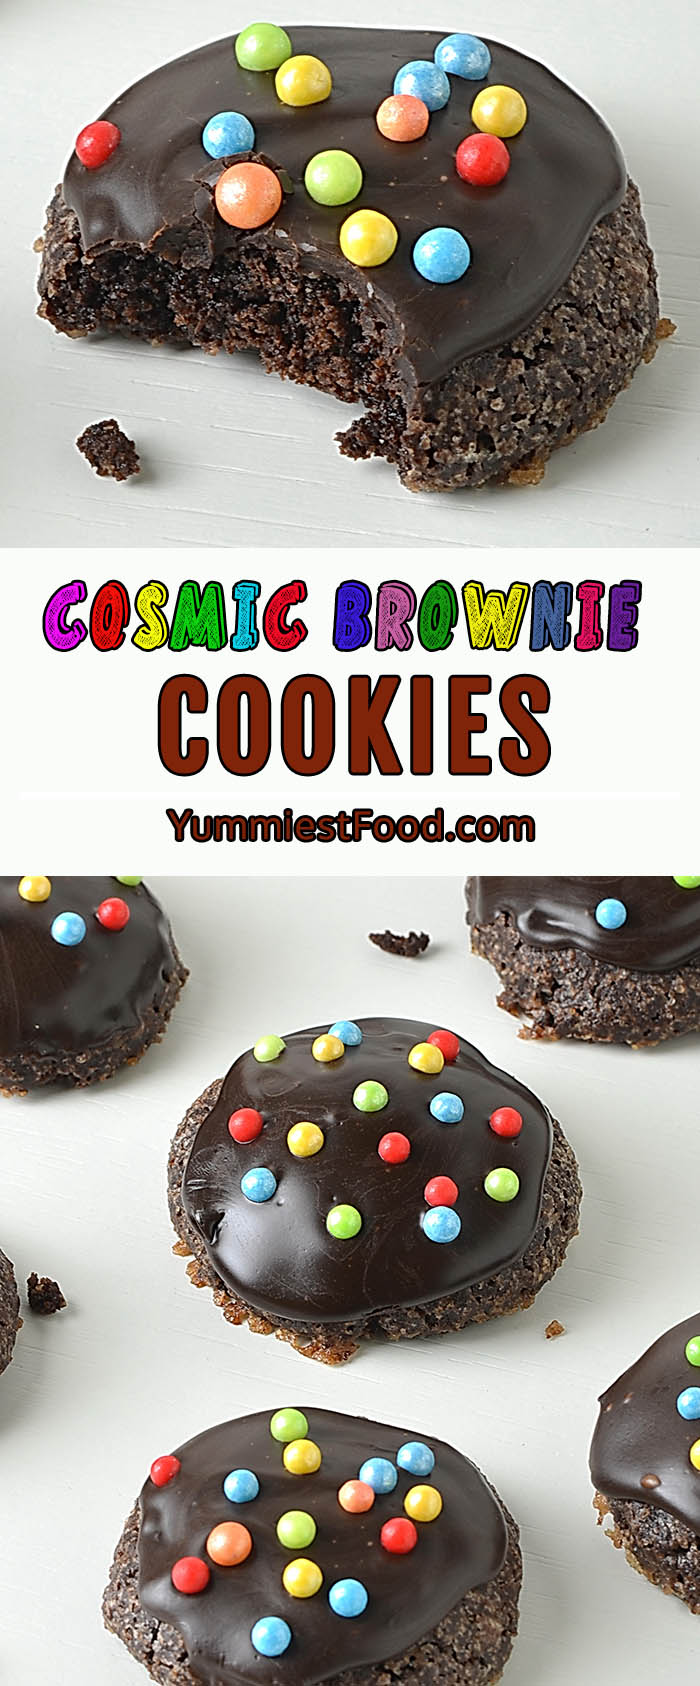 Cosmic Brownie Cookies are rich and chewy cookies made with boxed brownie mix and topped with chocolate ganache and colorful candy sprinkles